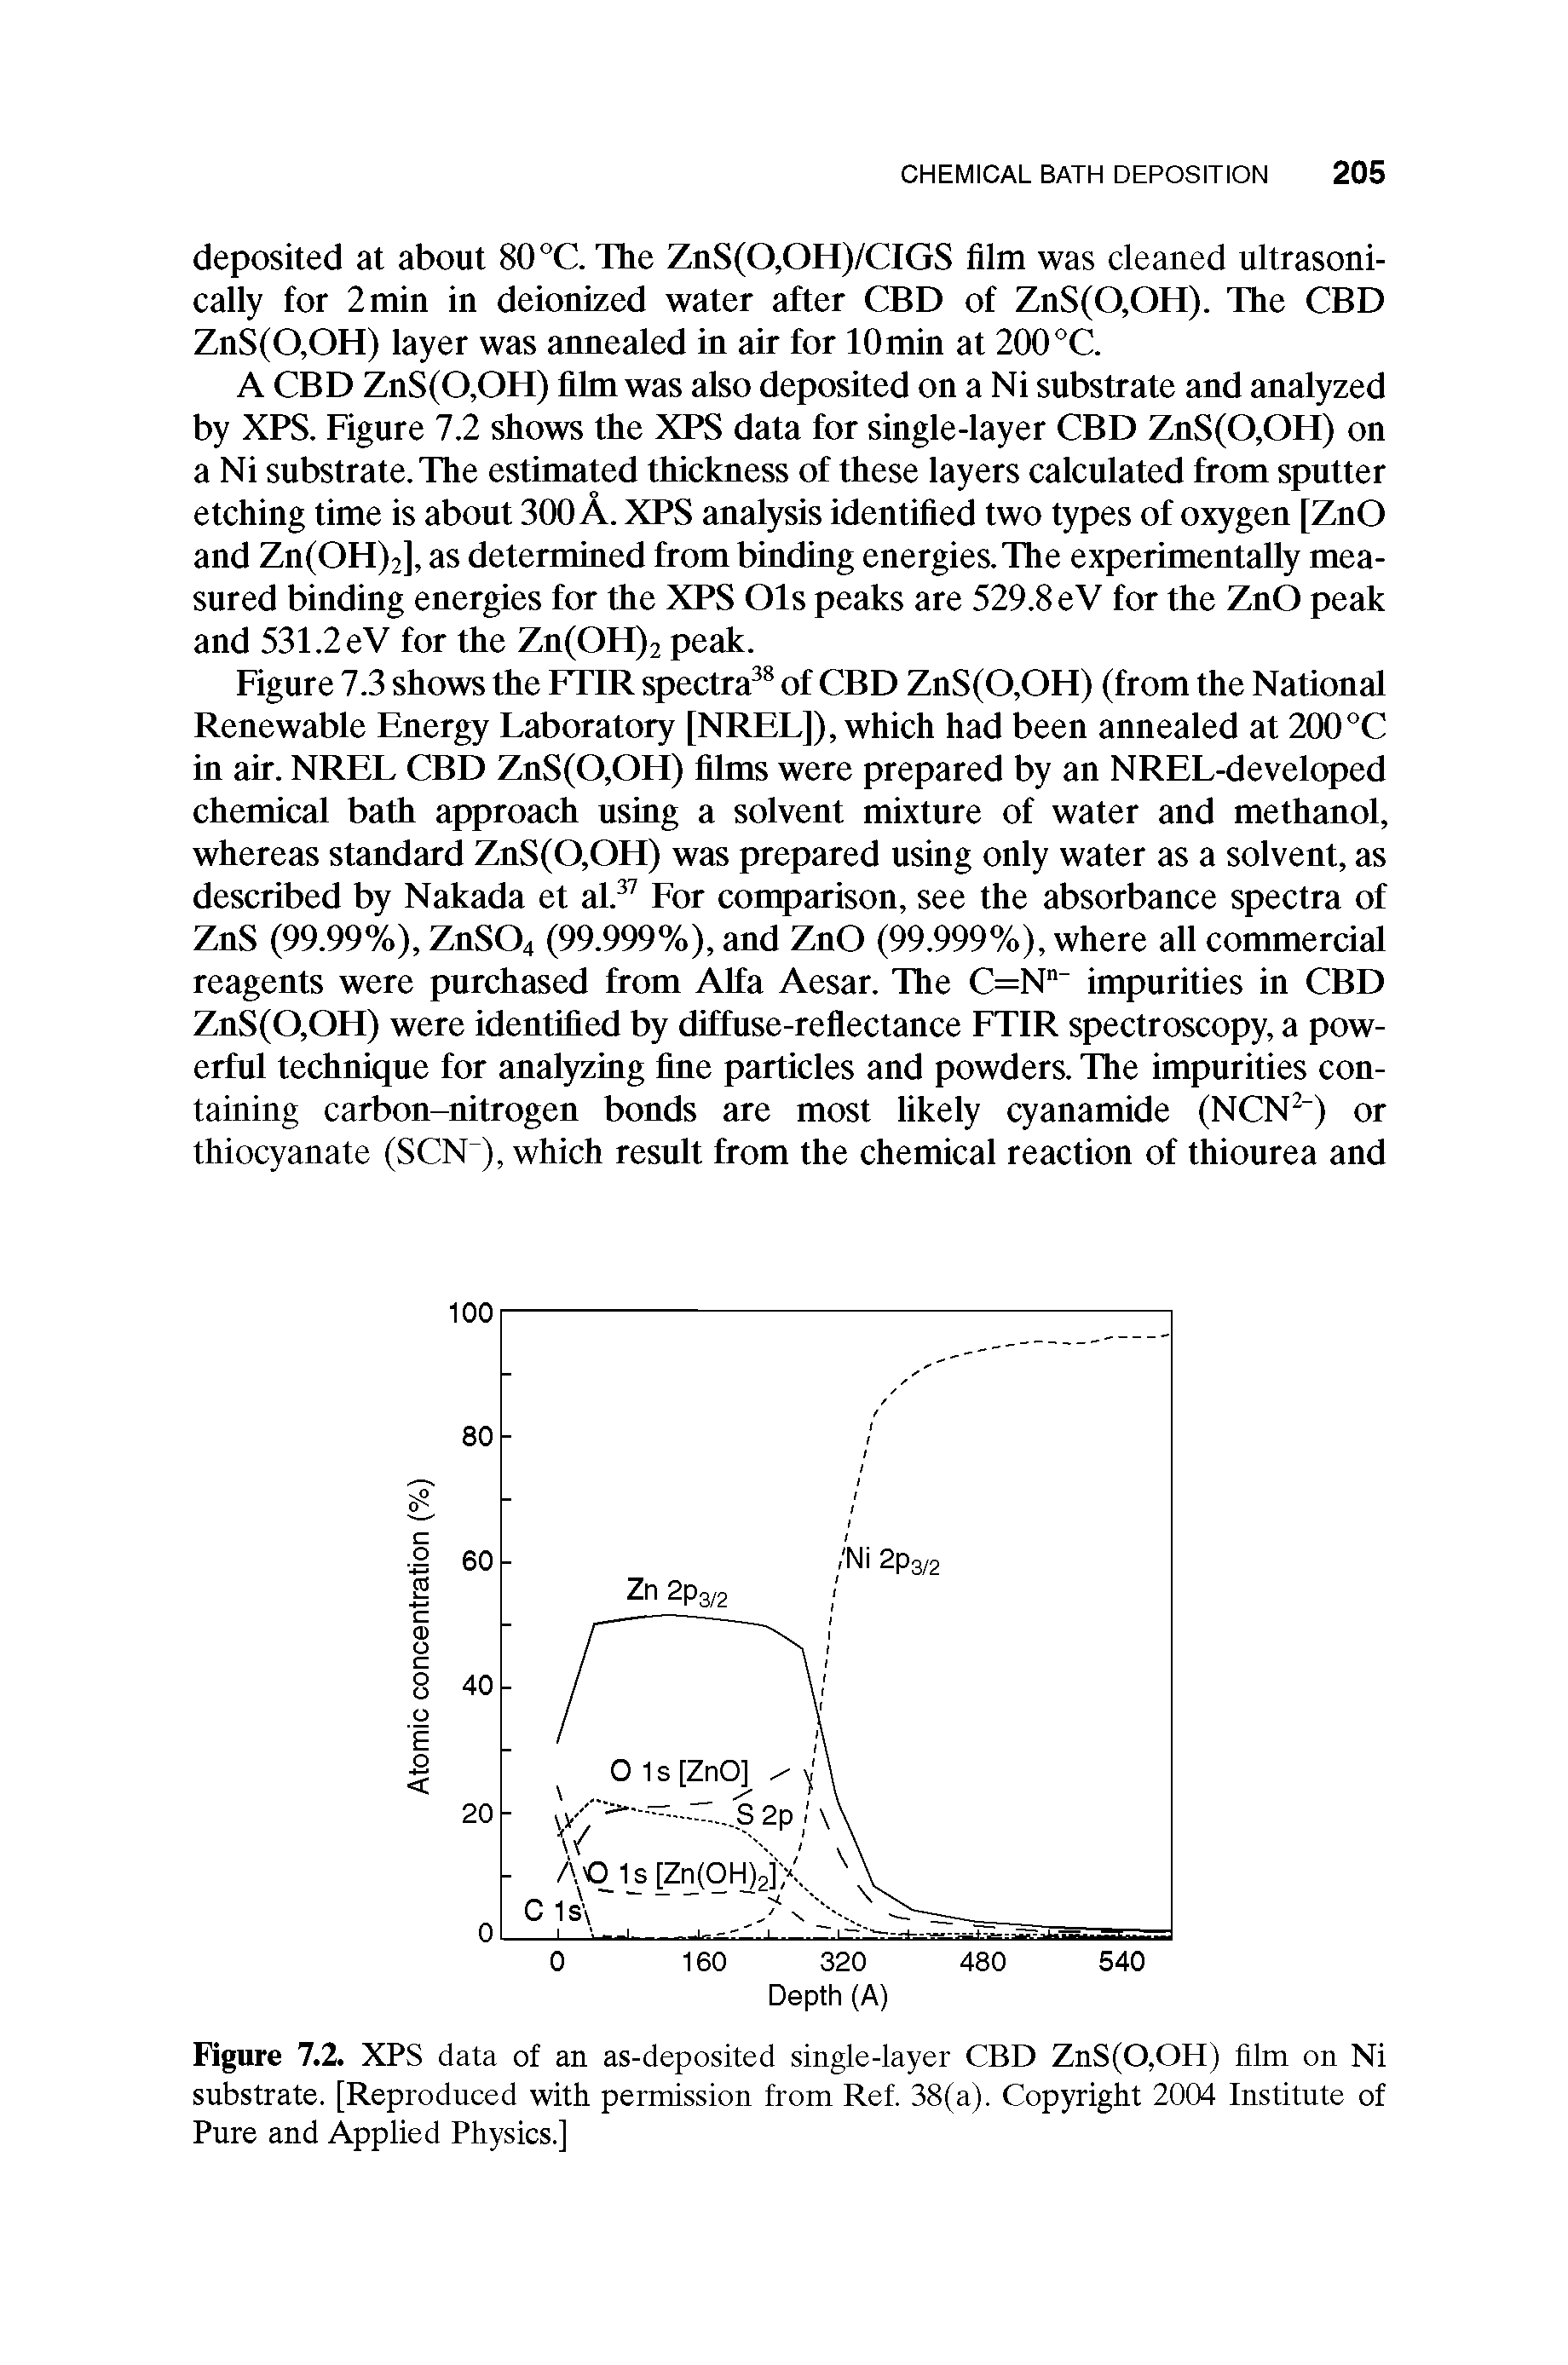 Figure 7.2. XPS data of an as-deposited single-layer CBD ZnS(0,0H) film on Ni substrate. [Reproduced with permission from Ref. 38(a). Copyright 2004 Institute of Pure and Applied Physics.]...